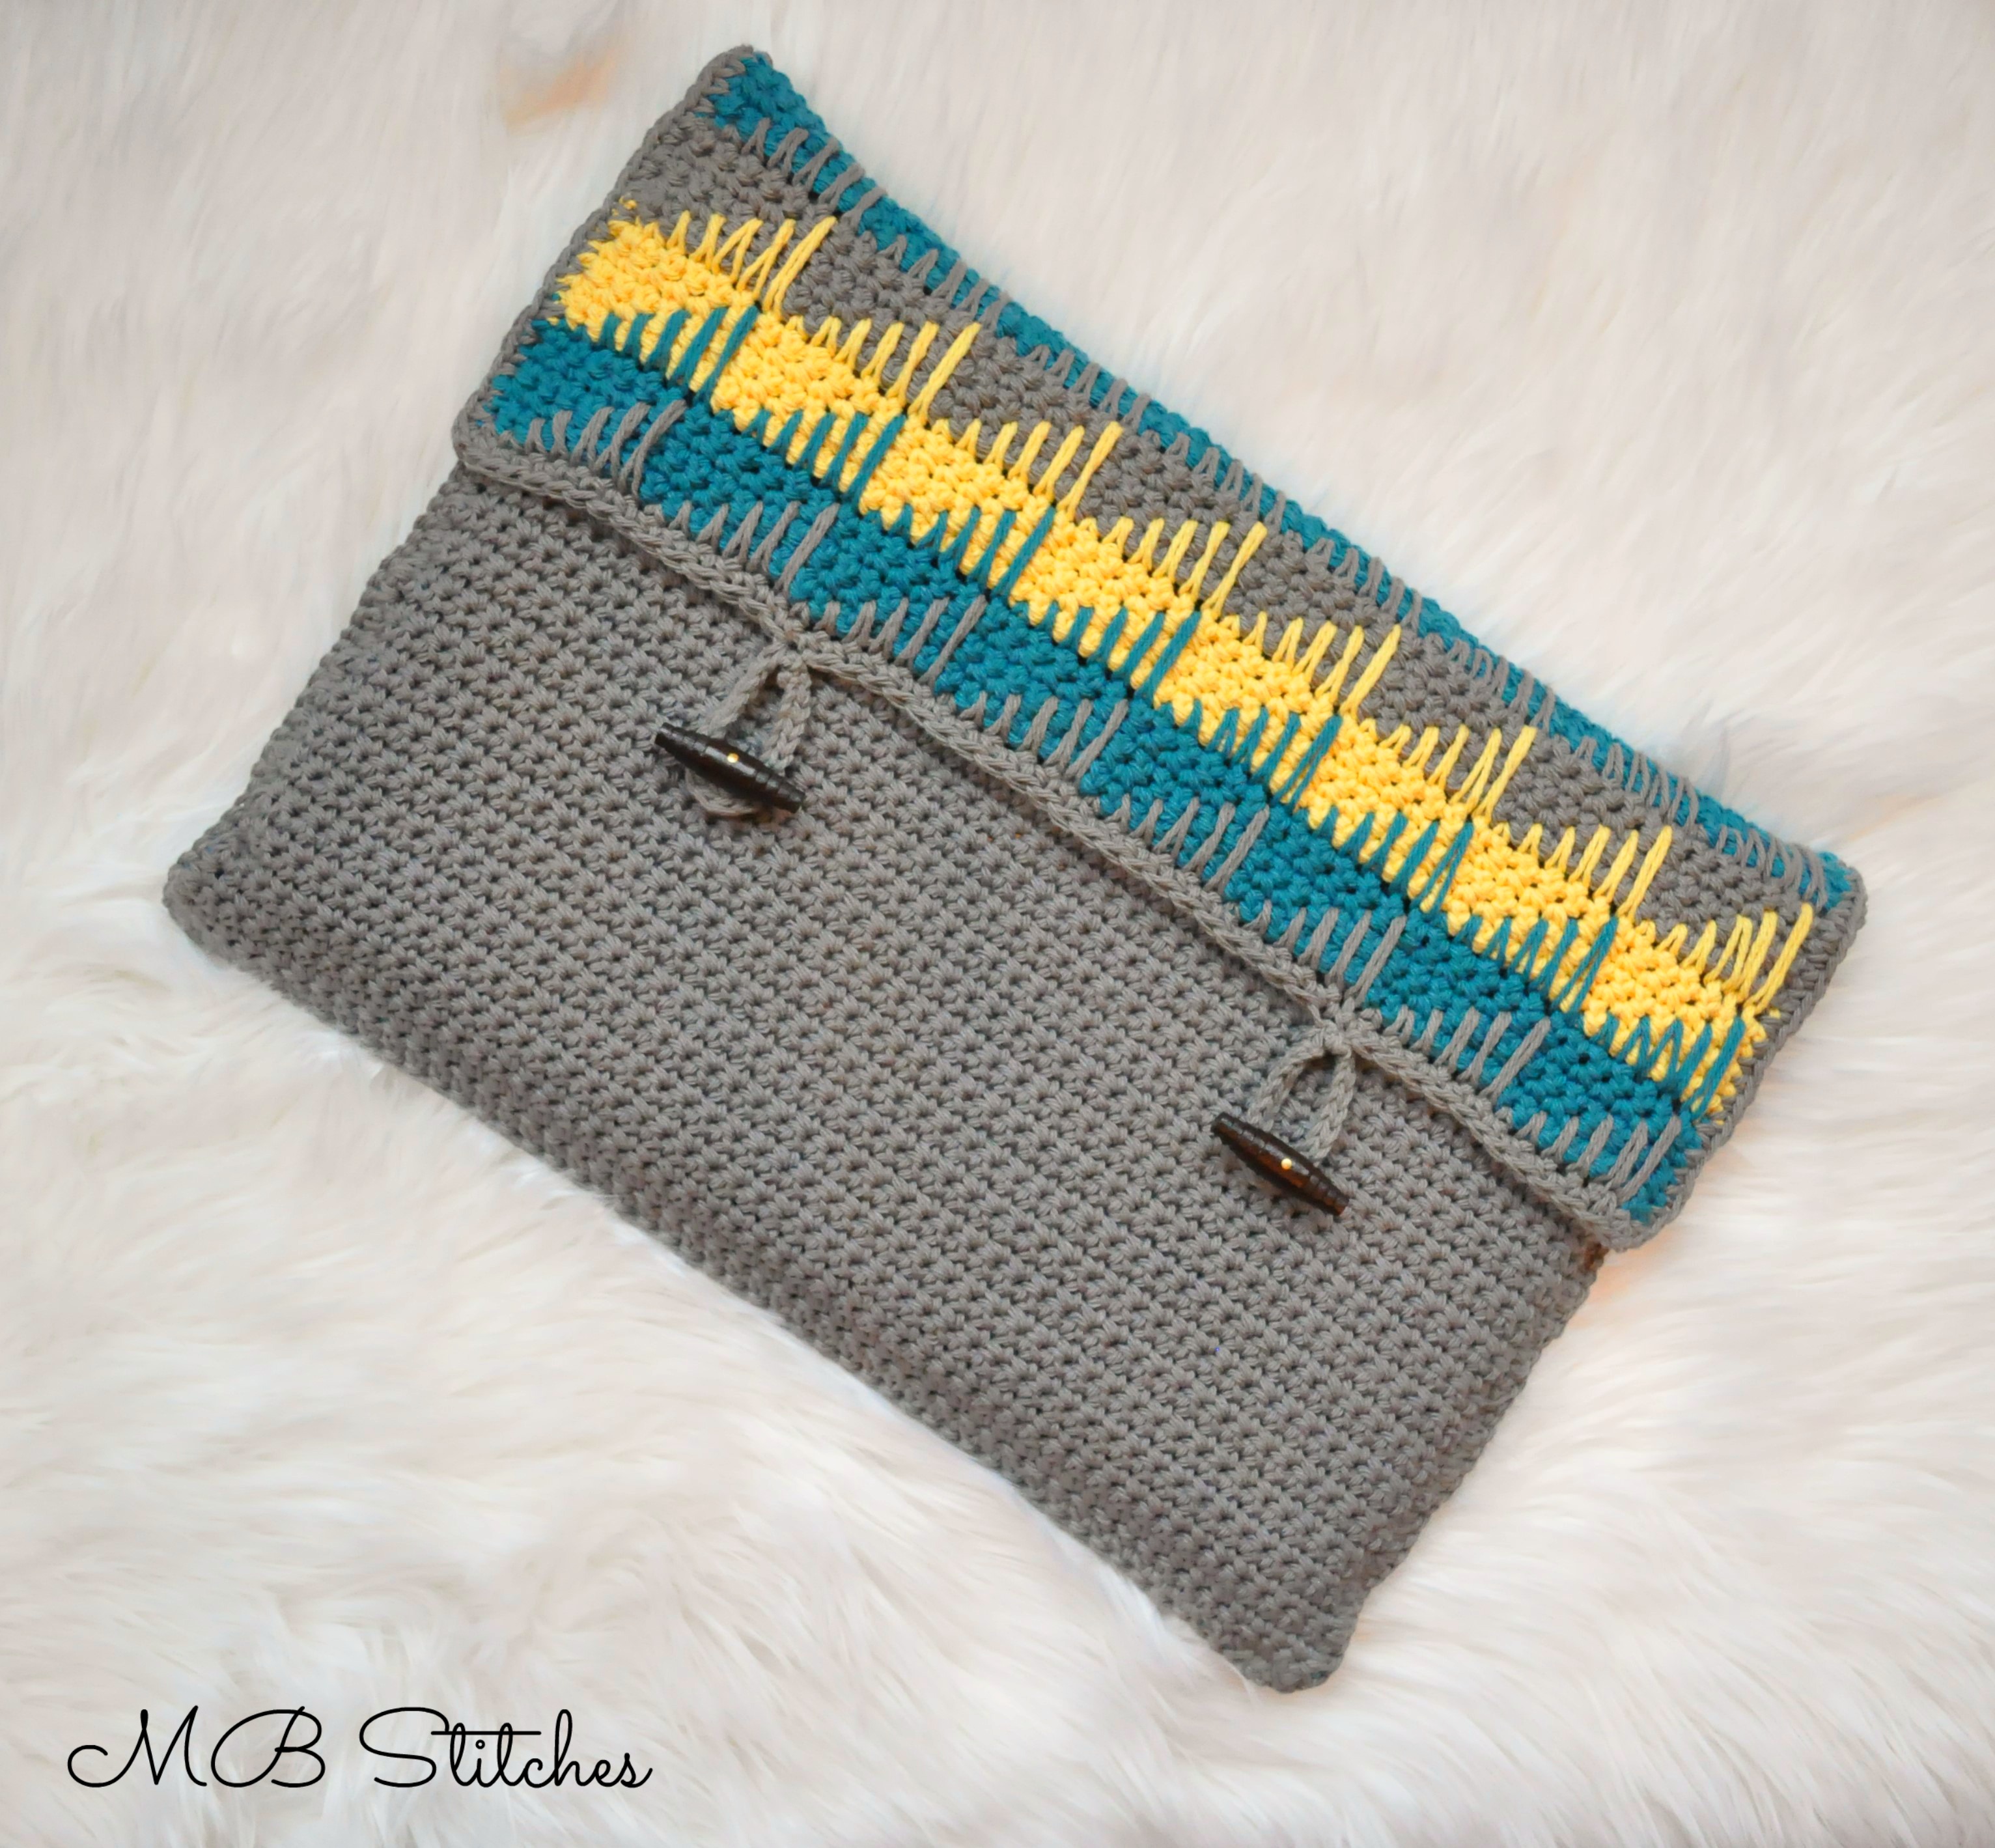 MB Stitches - Inspired crochet for everyday life